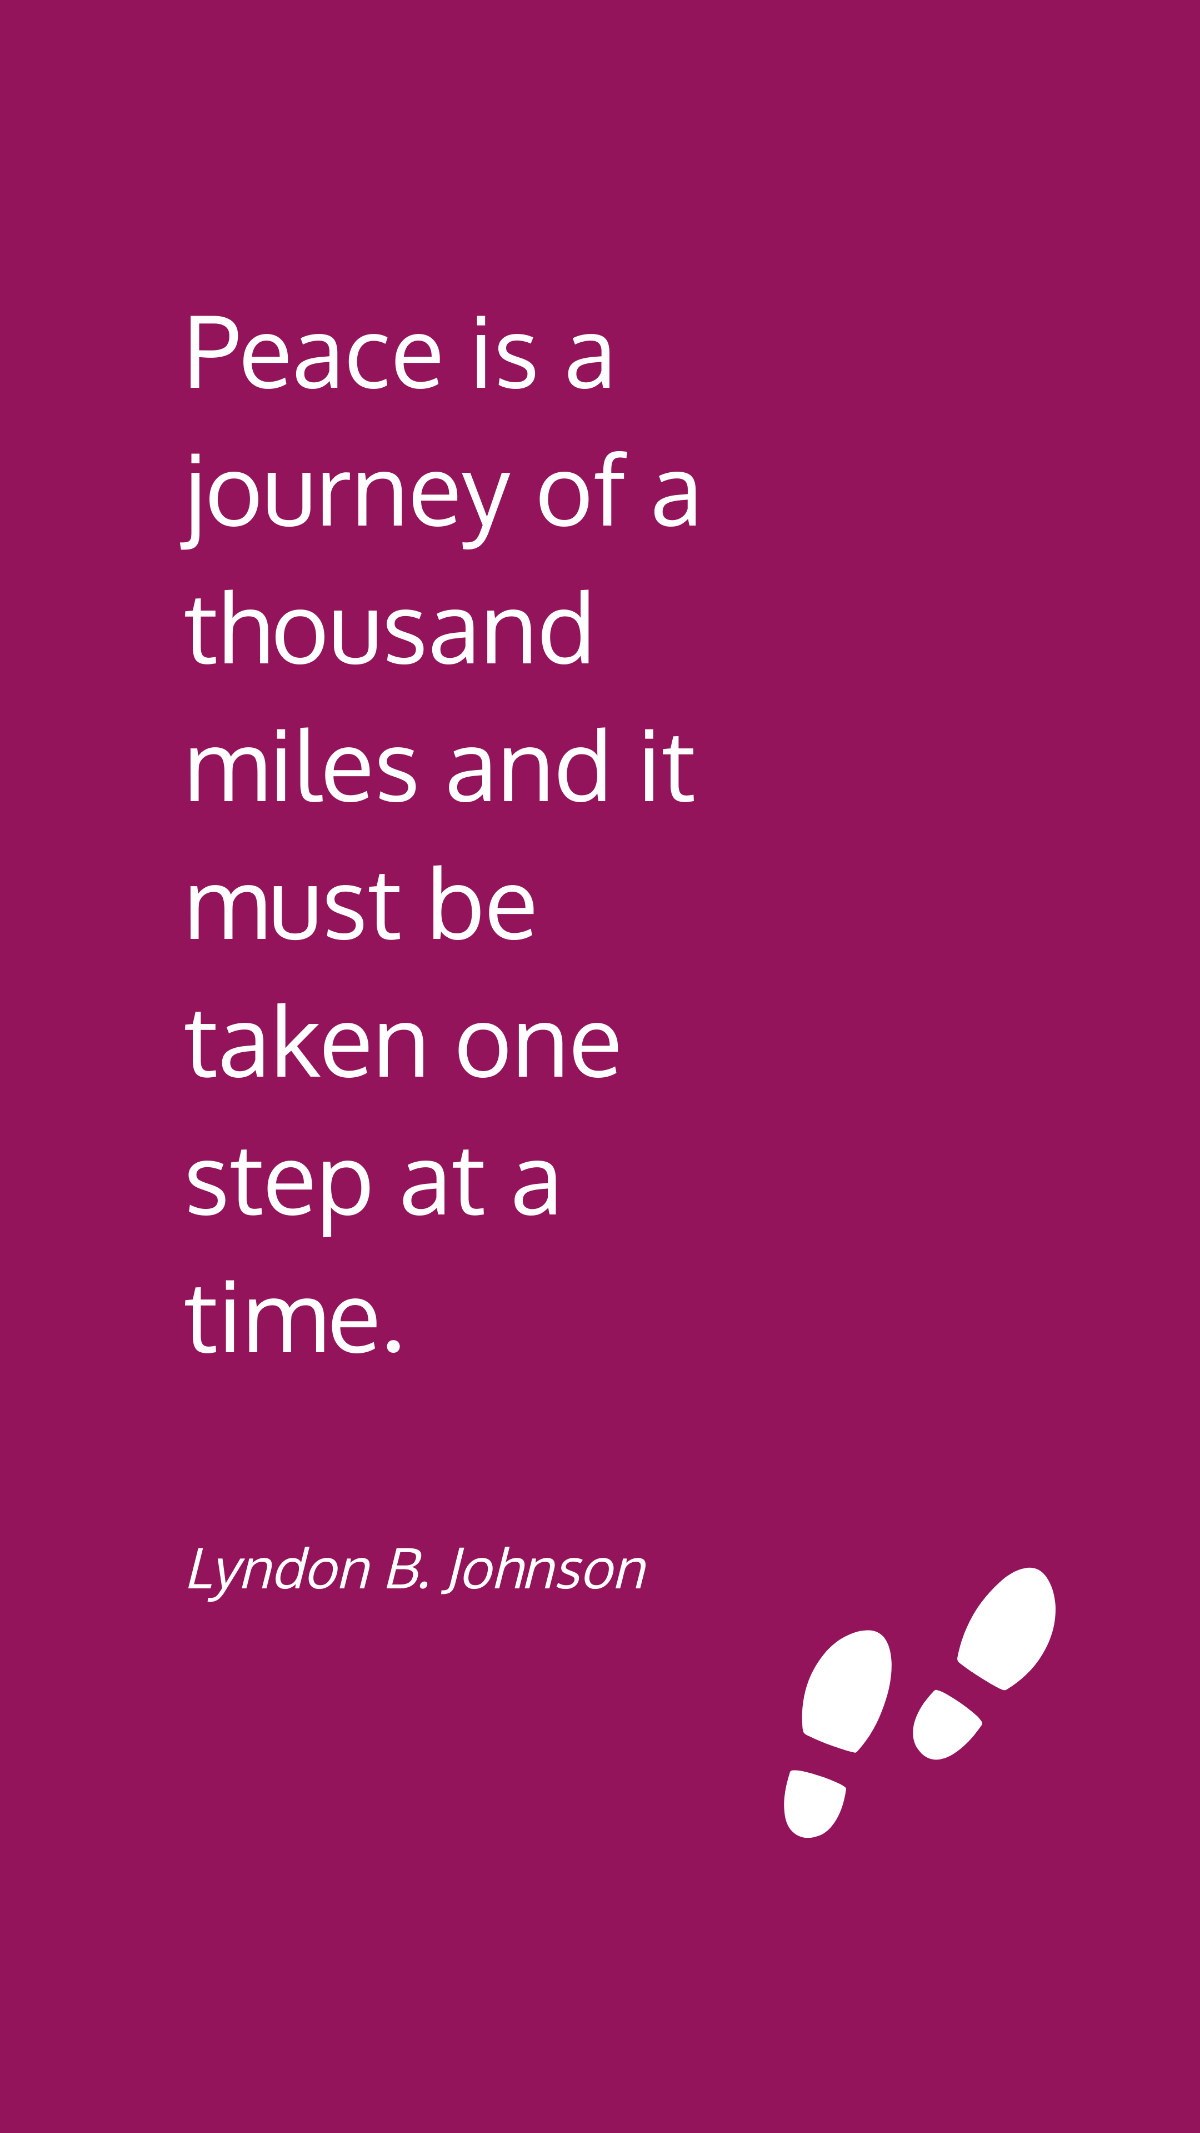 Lyndon B. Johnson - Peace is a journey of a thousand miles and it must be taken one step at a time. Template